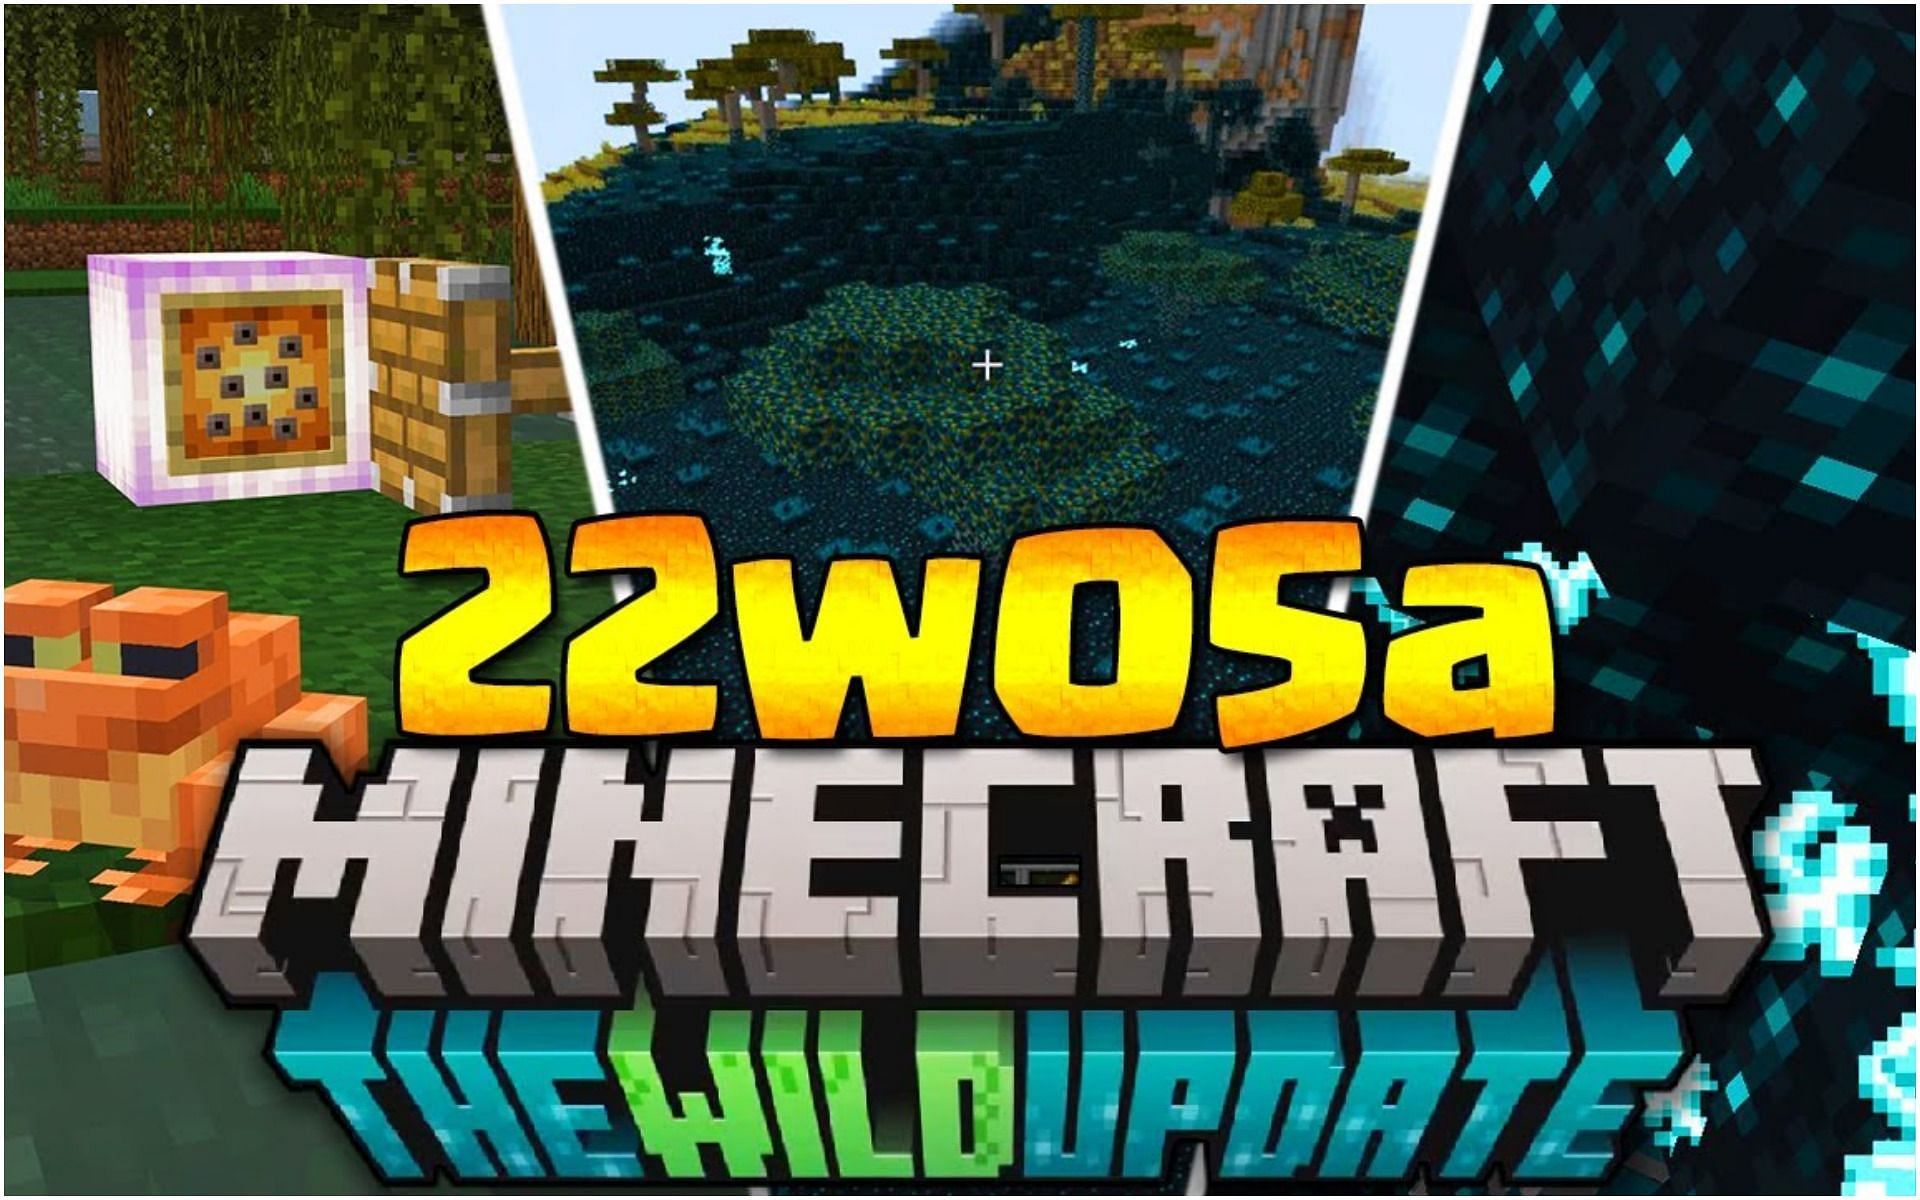 The 22w05a snapshot is the latest snapshot for Java Edition (Image via 9minecraft)